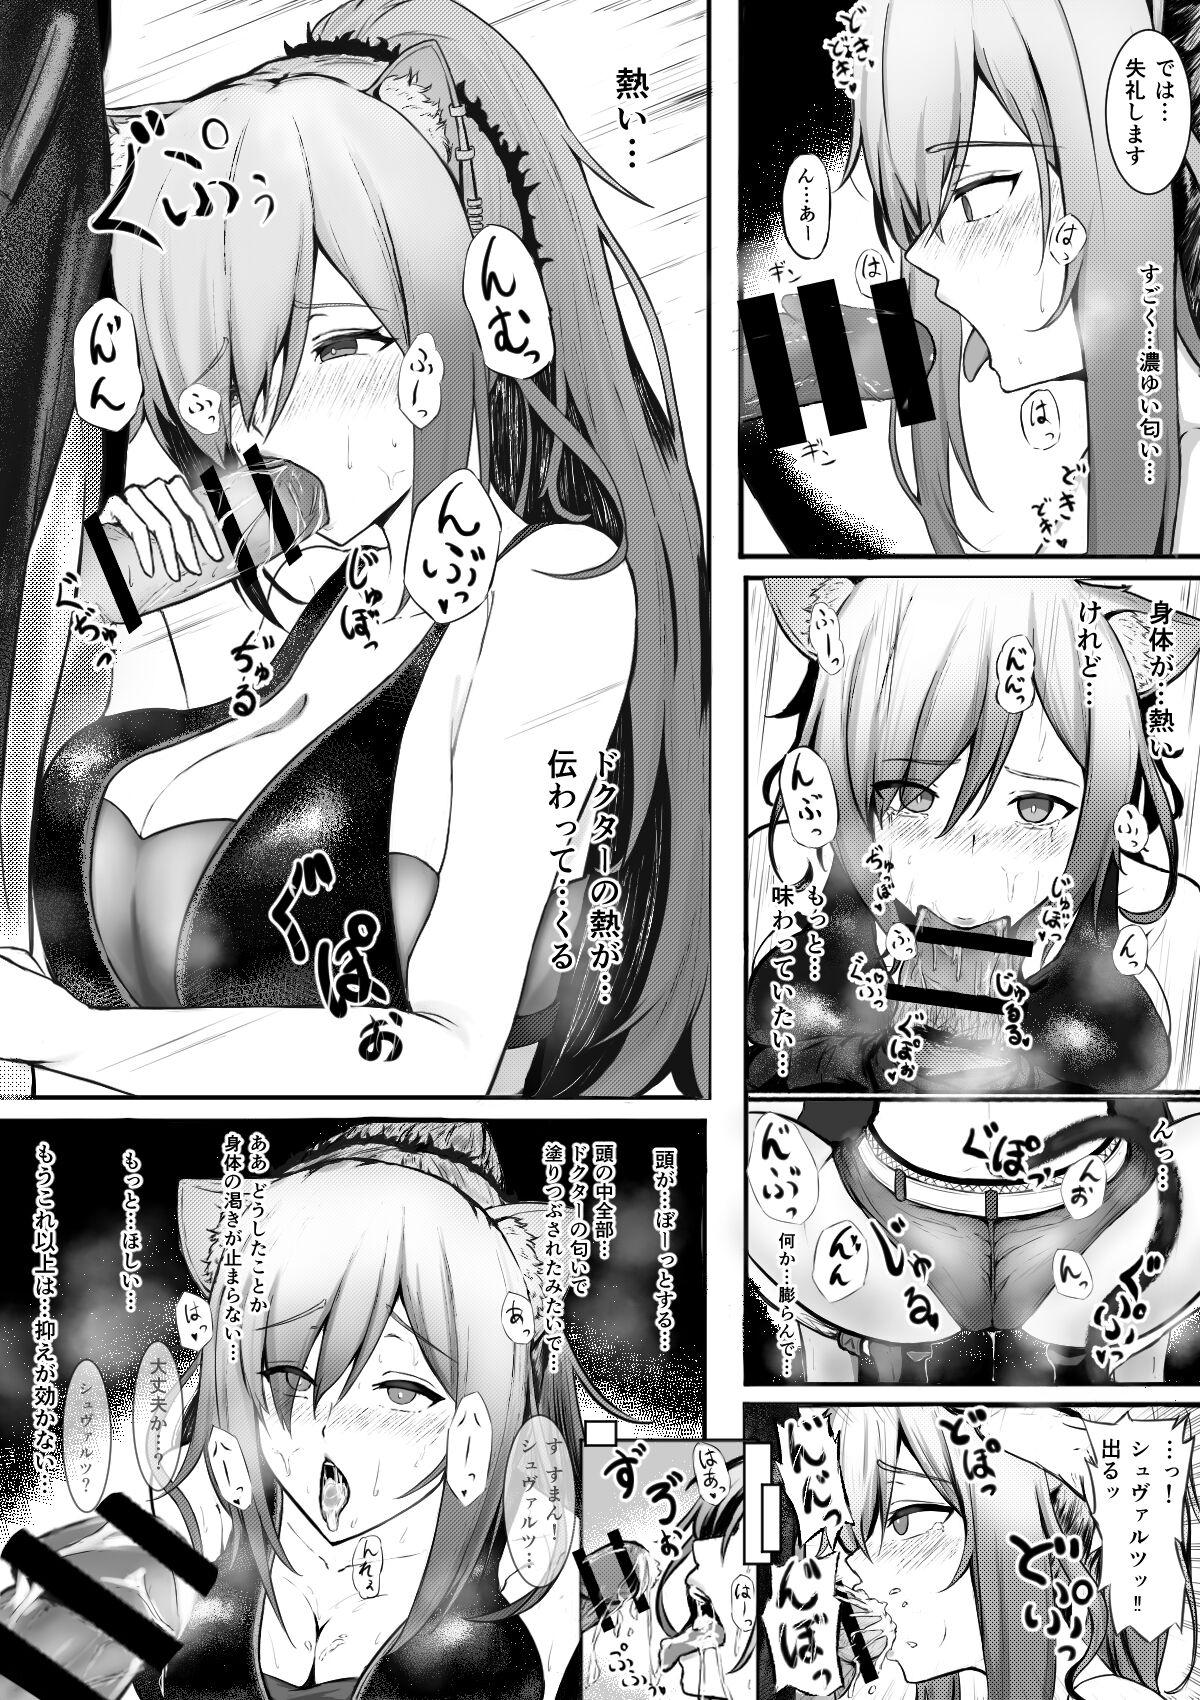 Tiny Titties arknights short story - Arknights Ass Fucking - Page 3